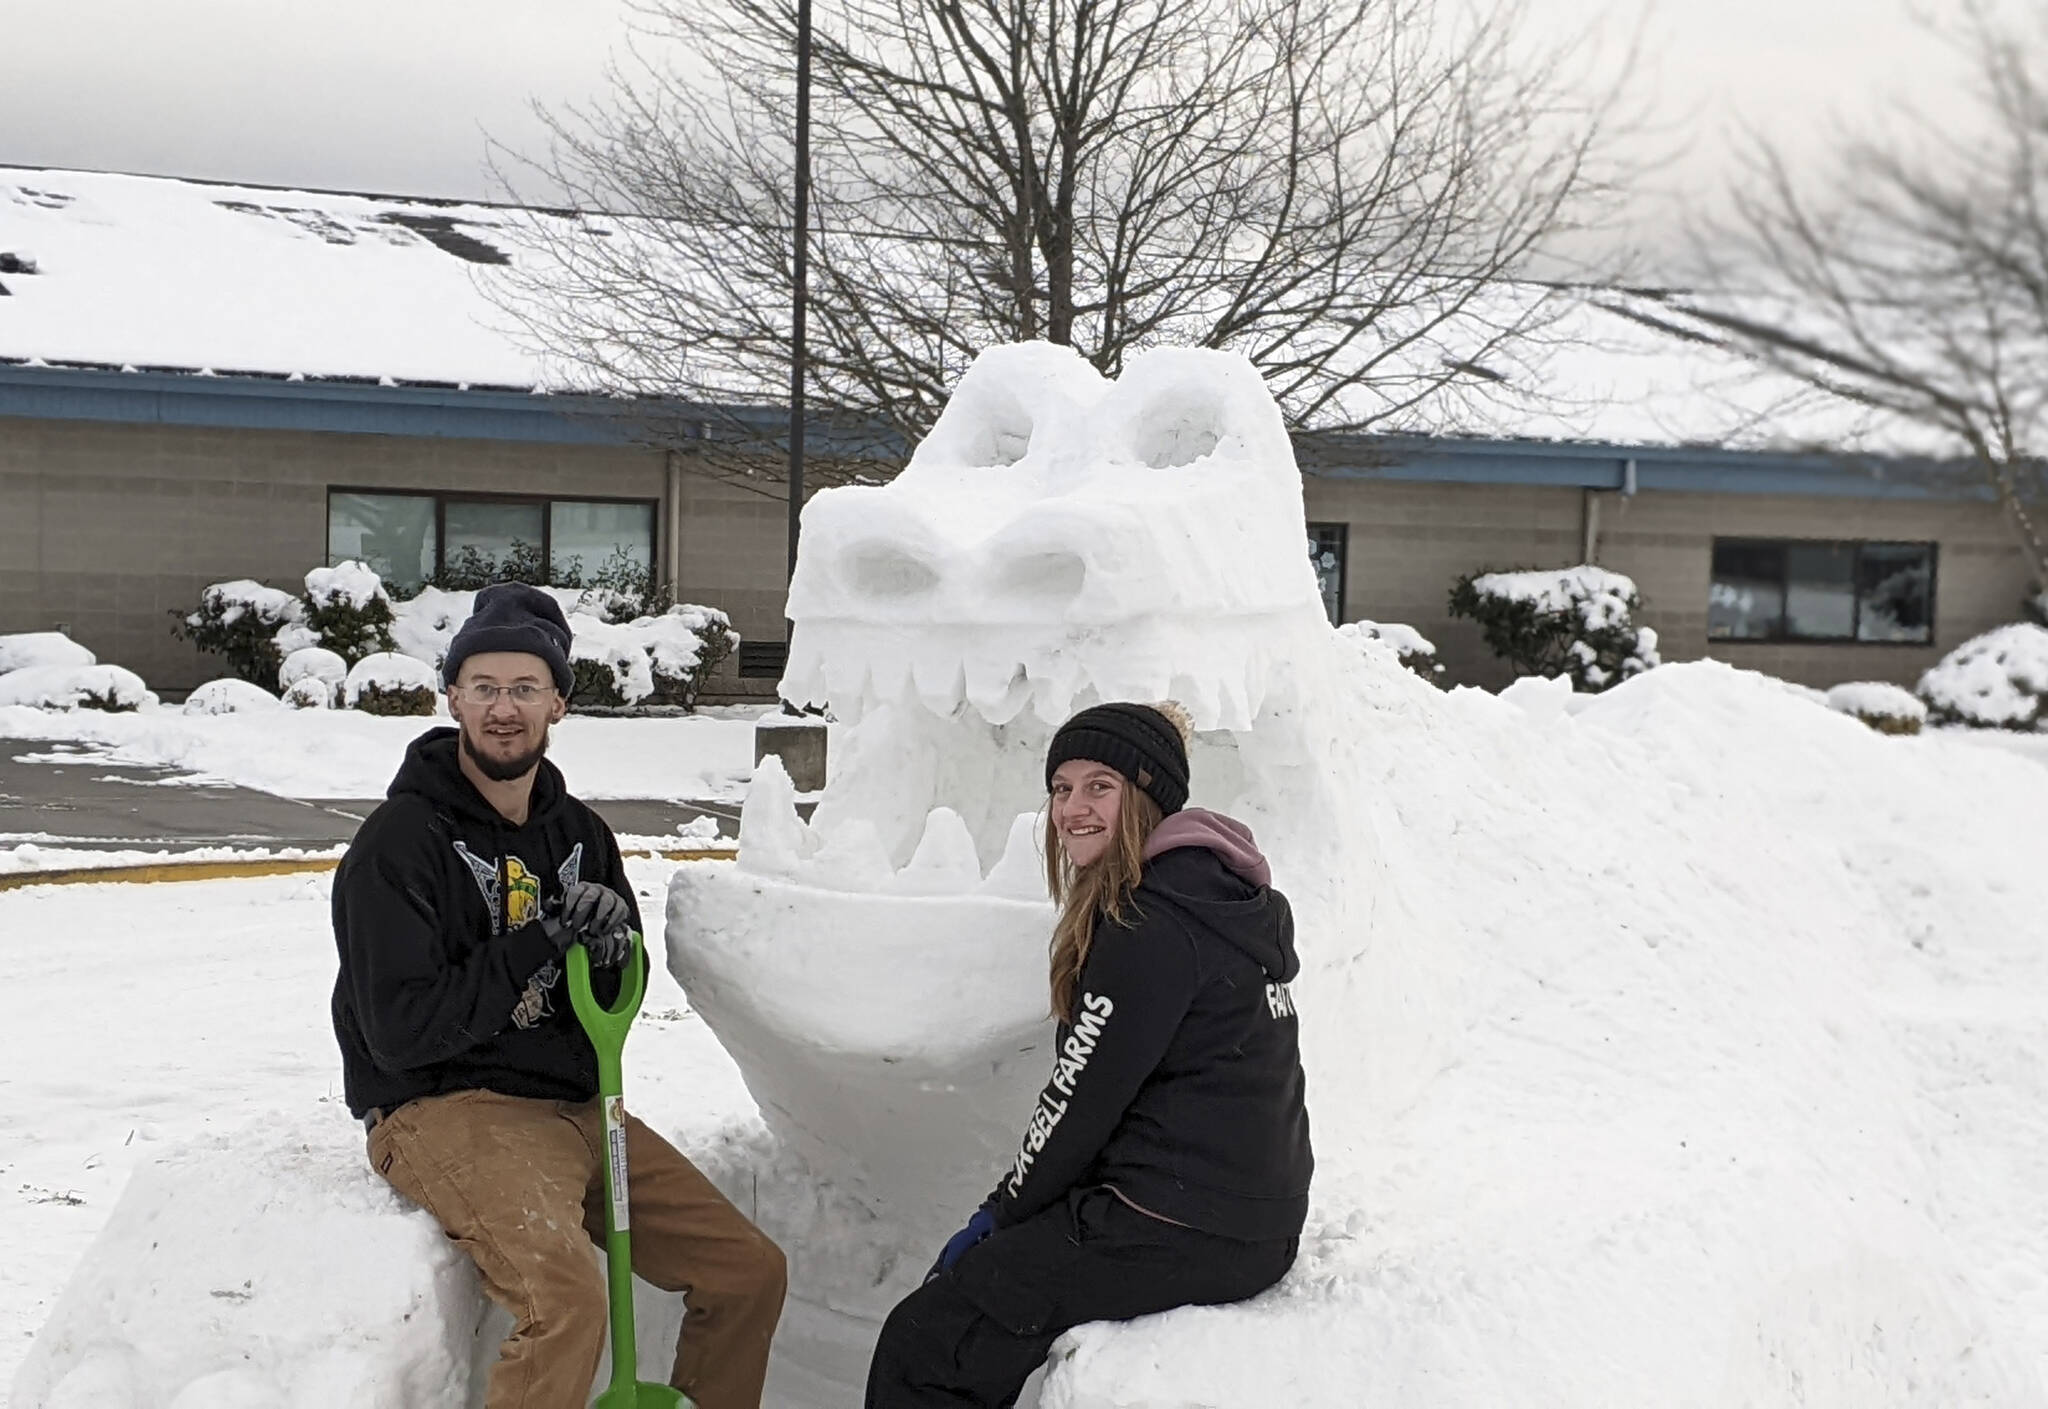 Andrew Lovell and Faith Haggie display a snow creature they created with last week’s snowfall at Greywolf Elementary School in Carlsborg. Photo by Melissa Sanford